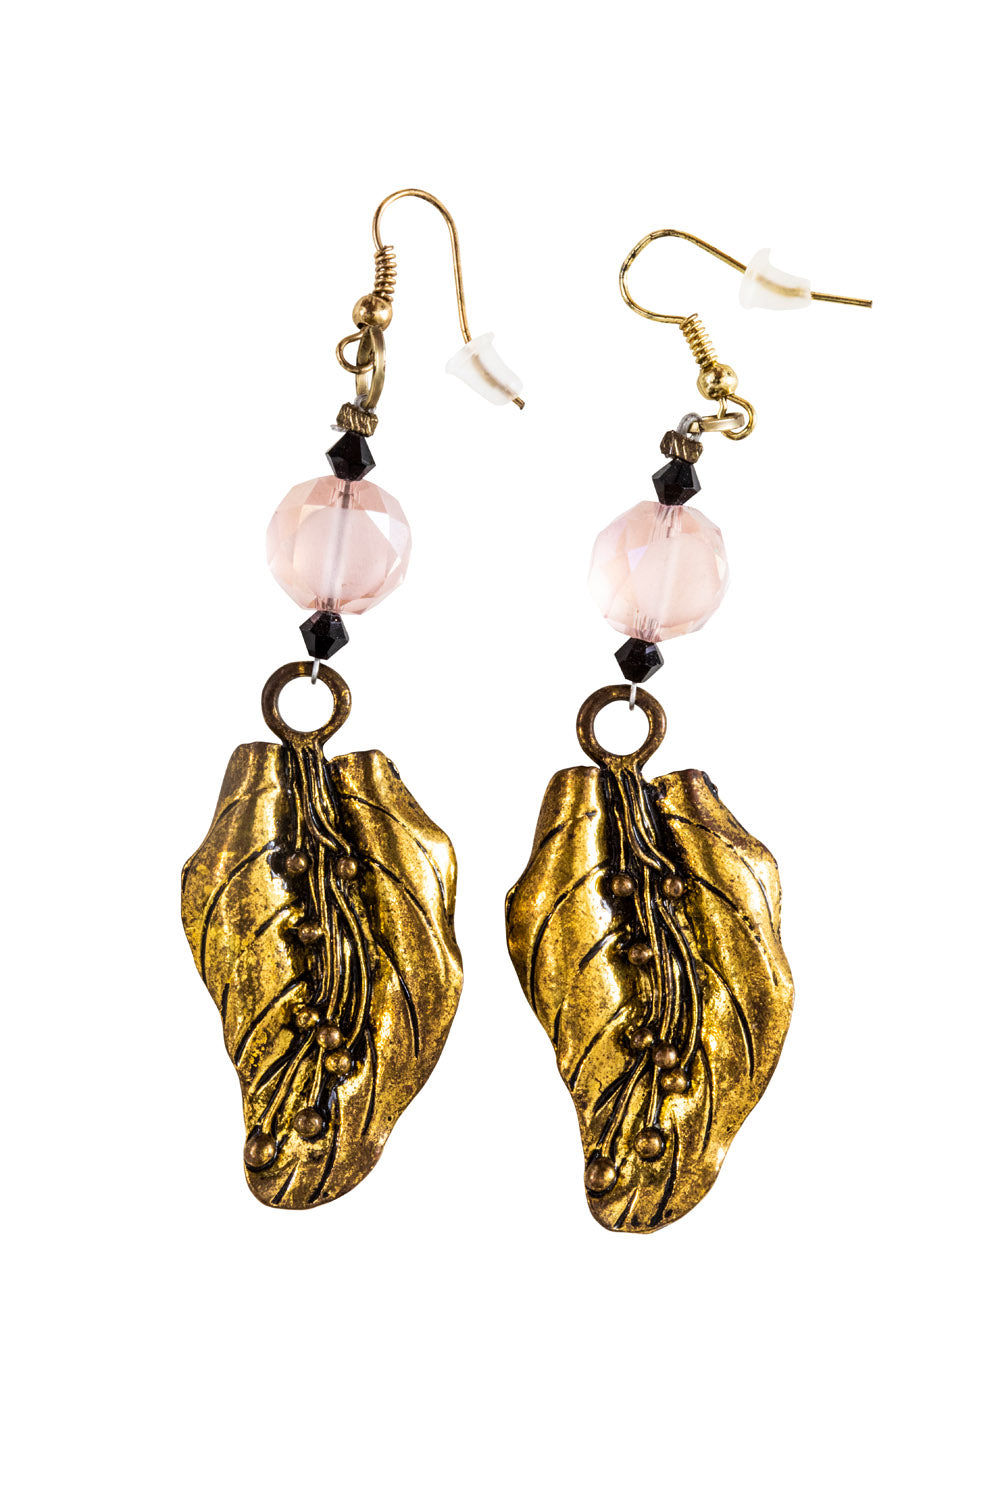 Gold metal leaf; lily of the valley pendants with a pink Chinese crystal earrings.